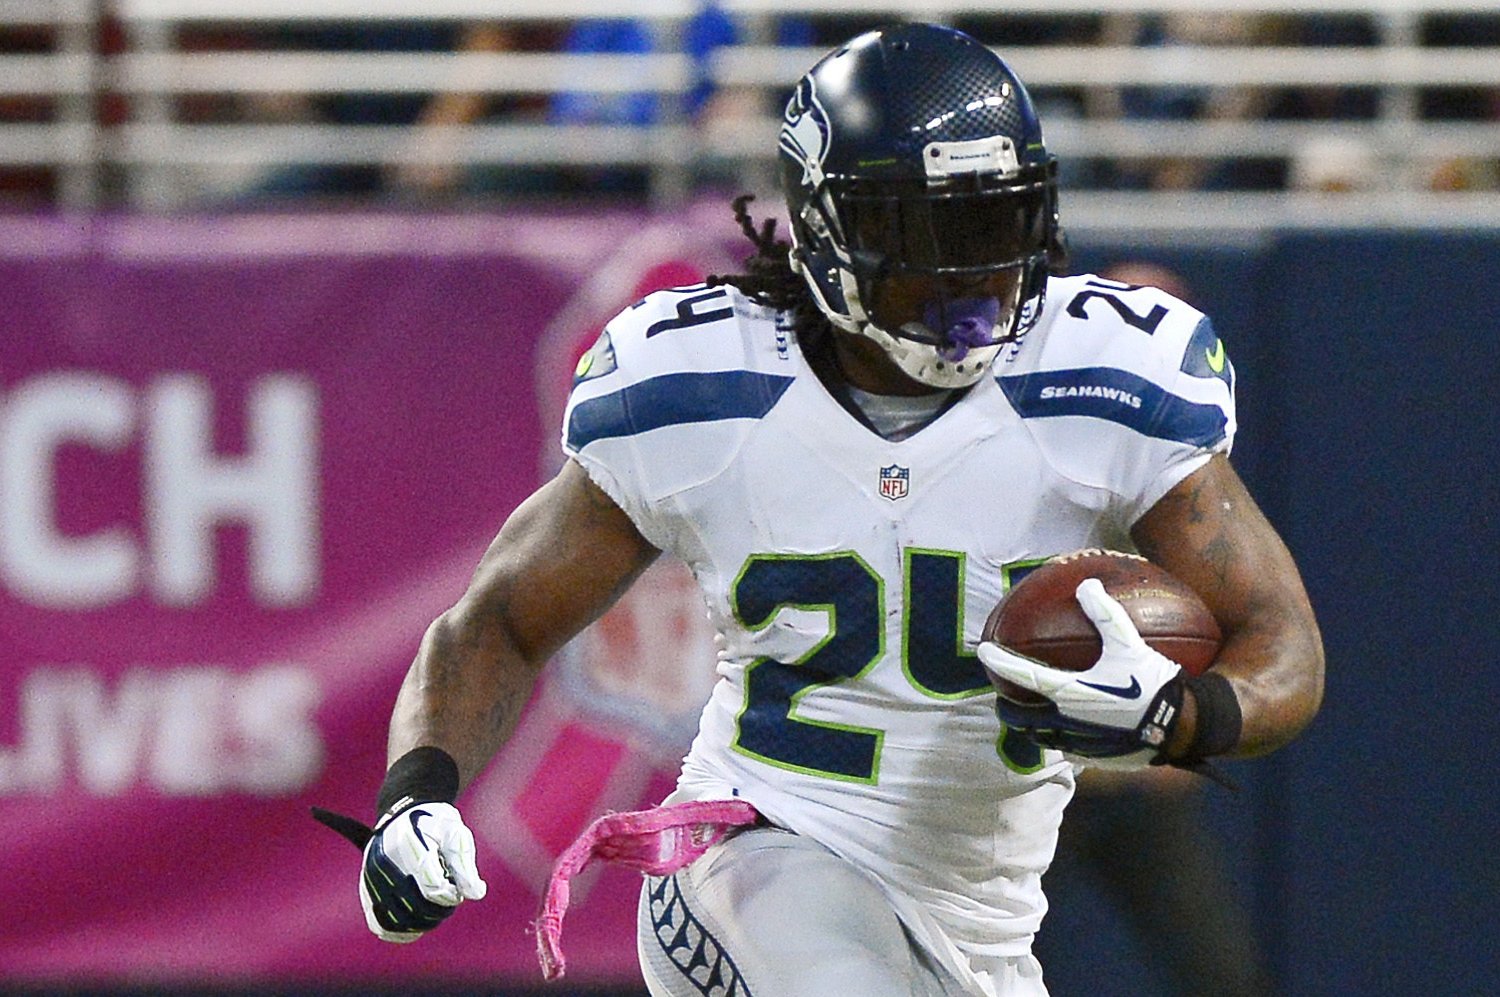 Marshawn Lynch Rumors: Latest Buzz and Speculation on RB's Future with Seahawks ...